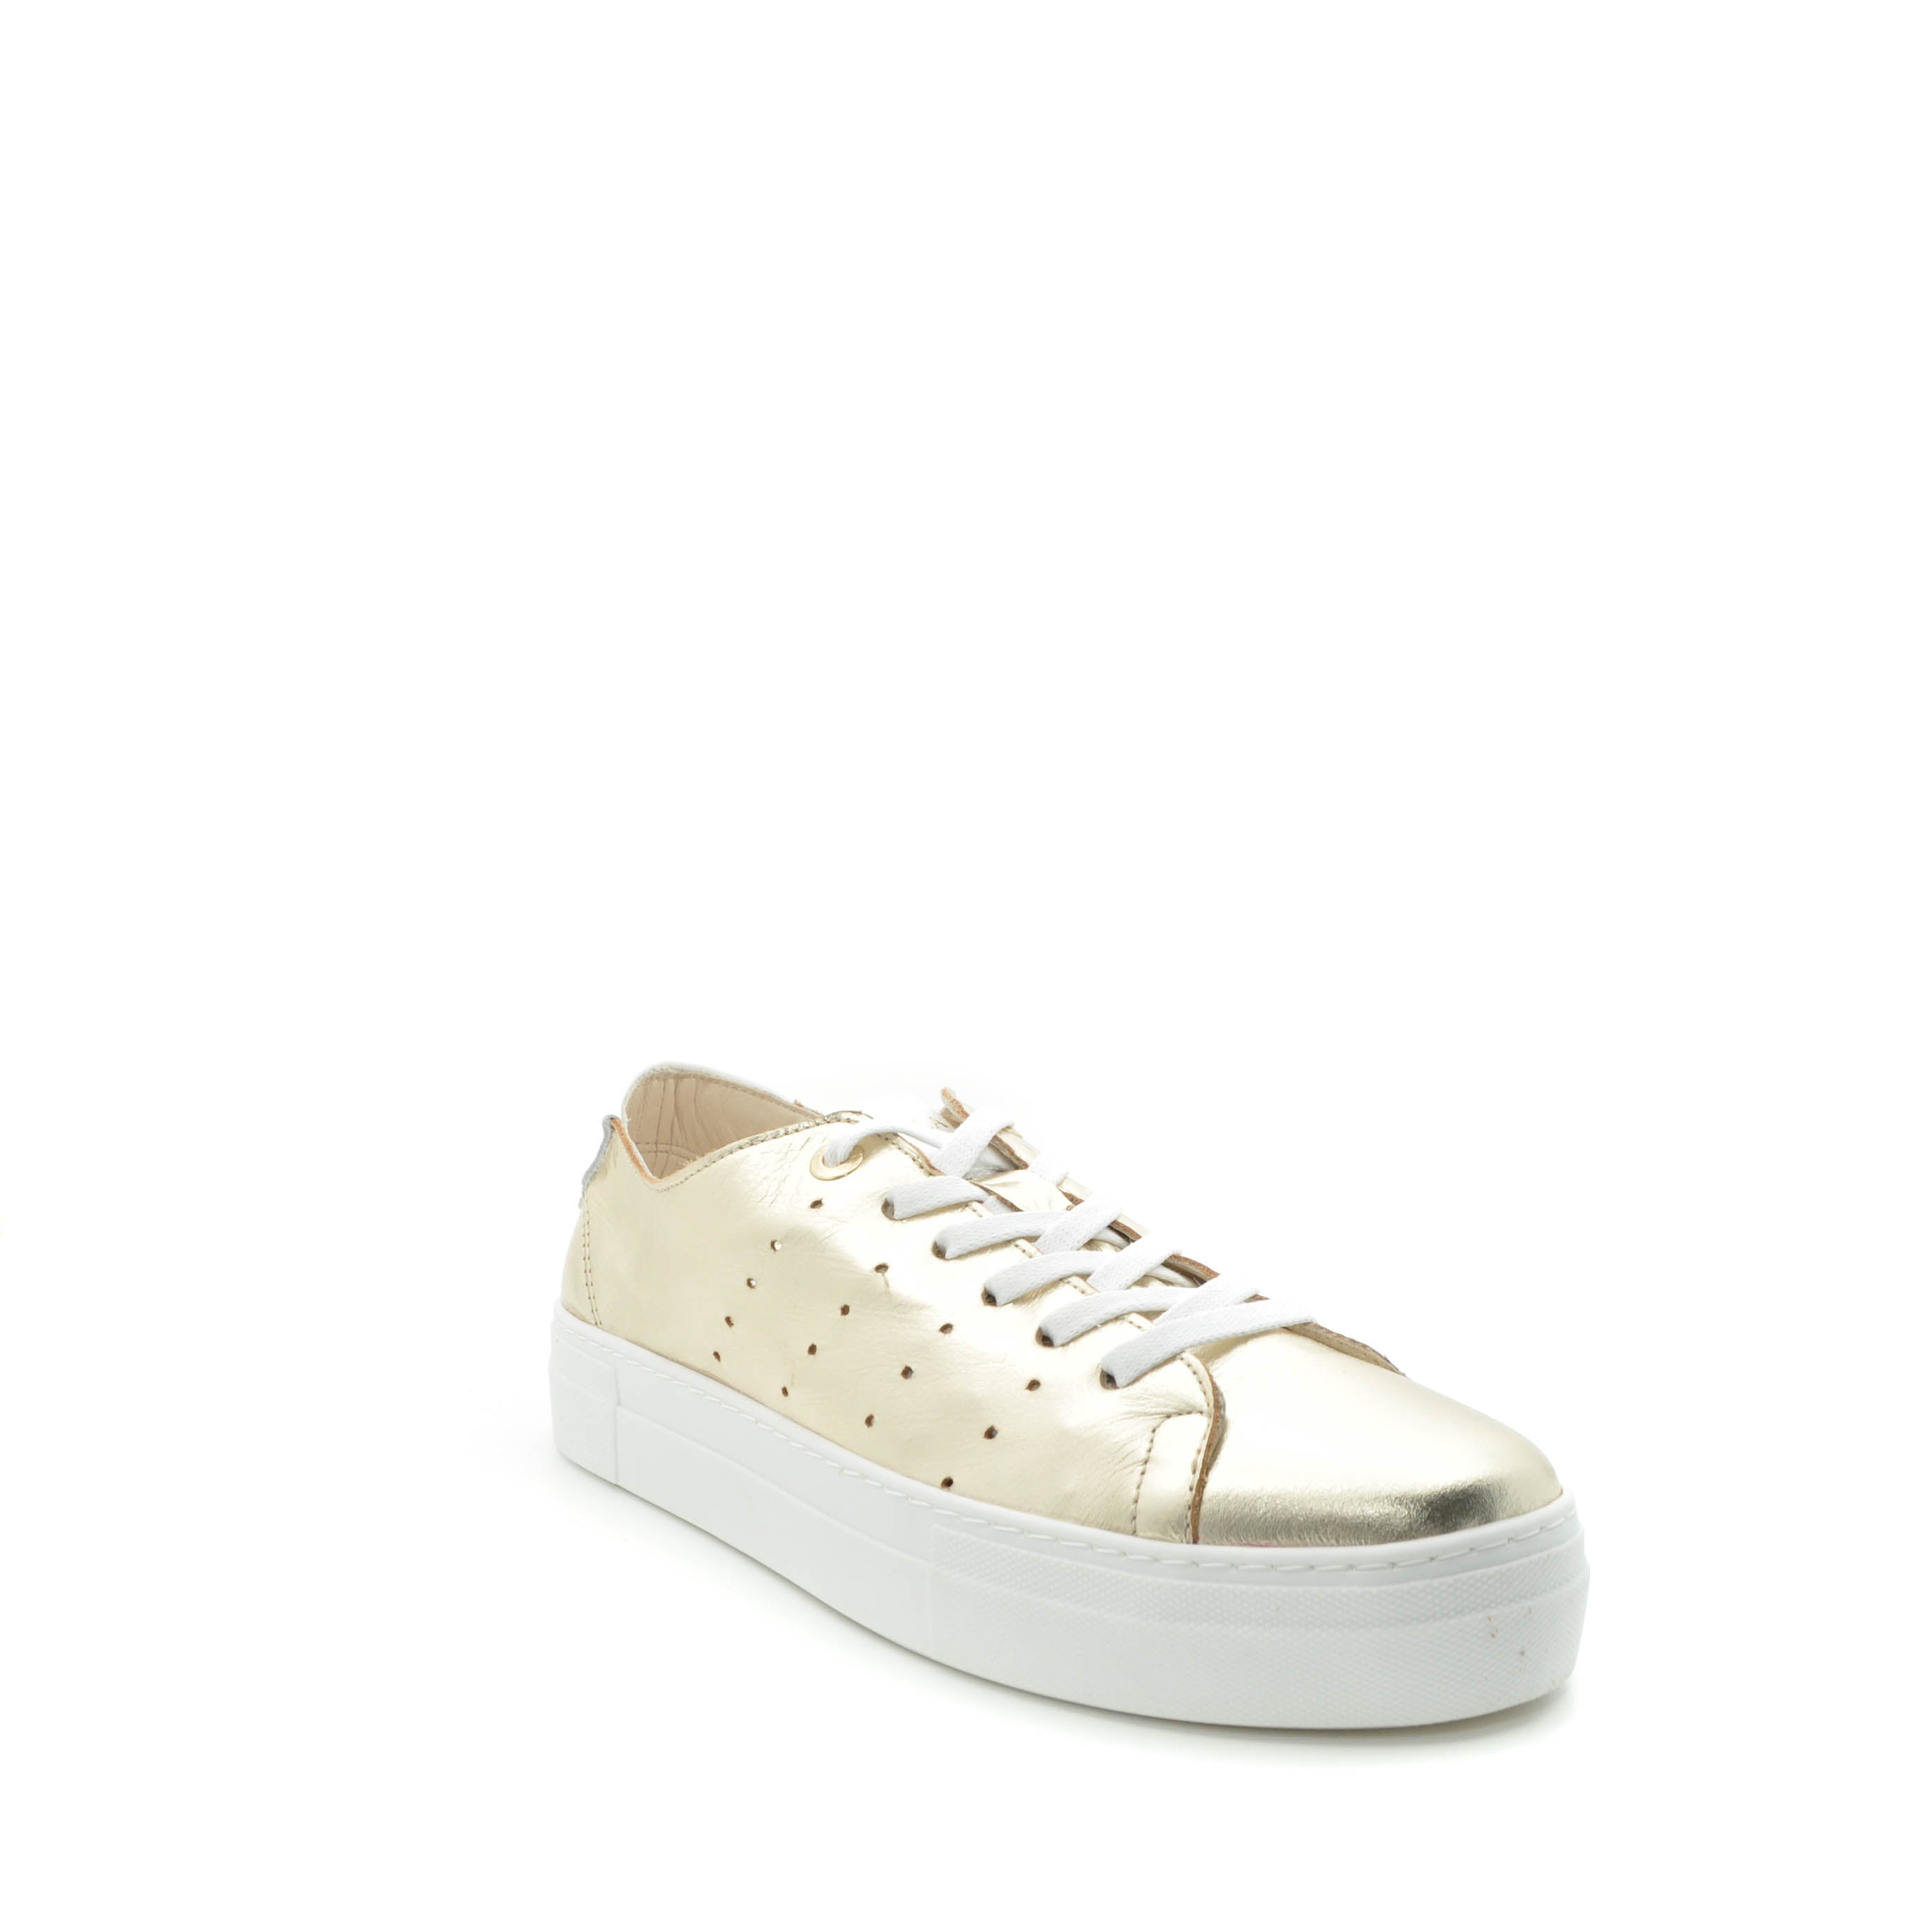 Gold dressy trainers